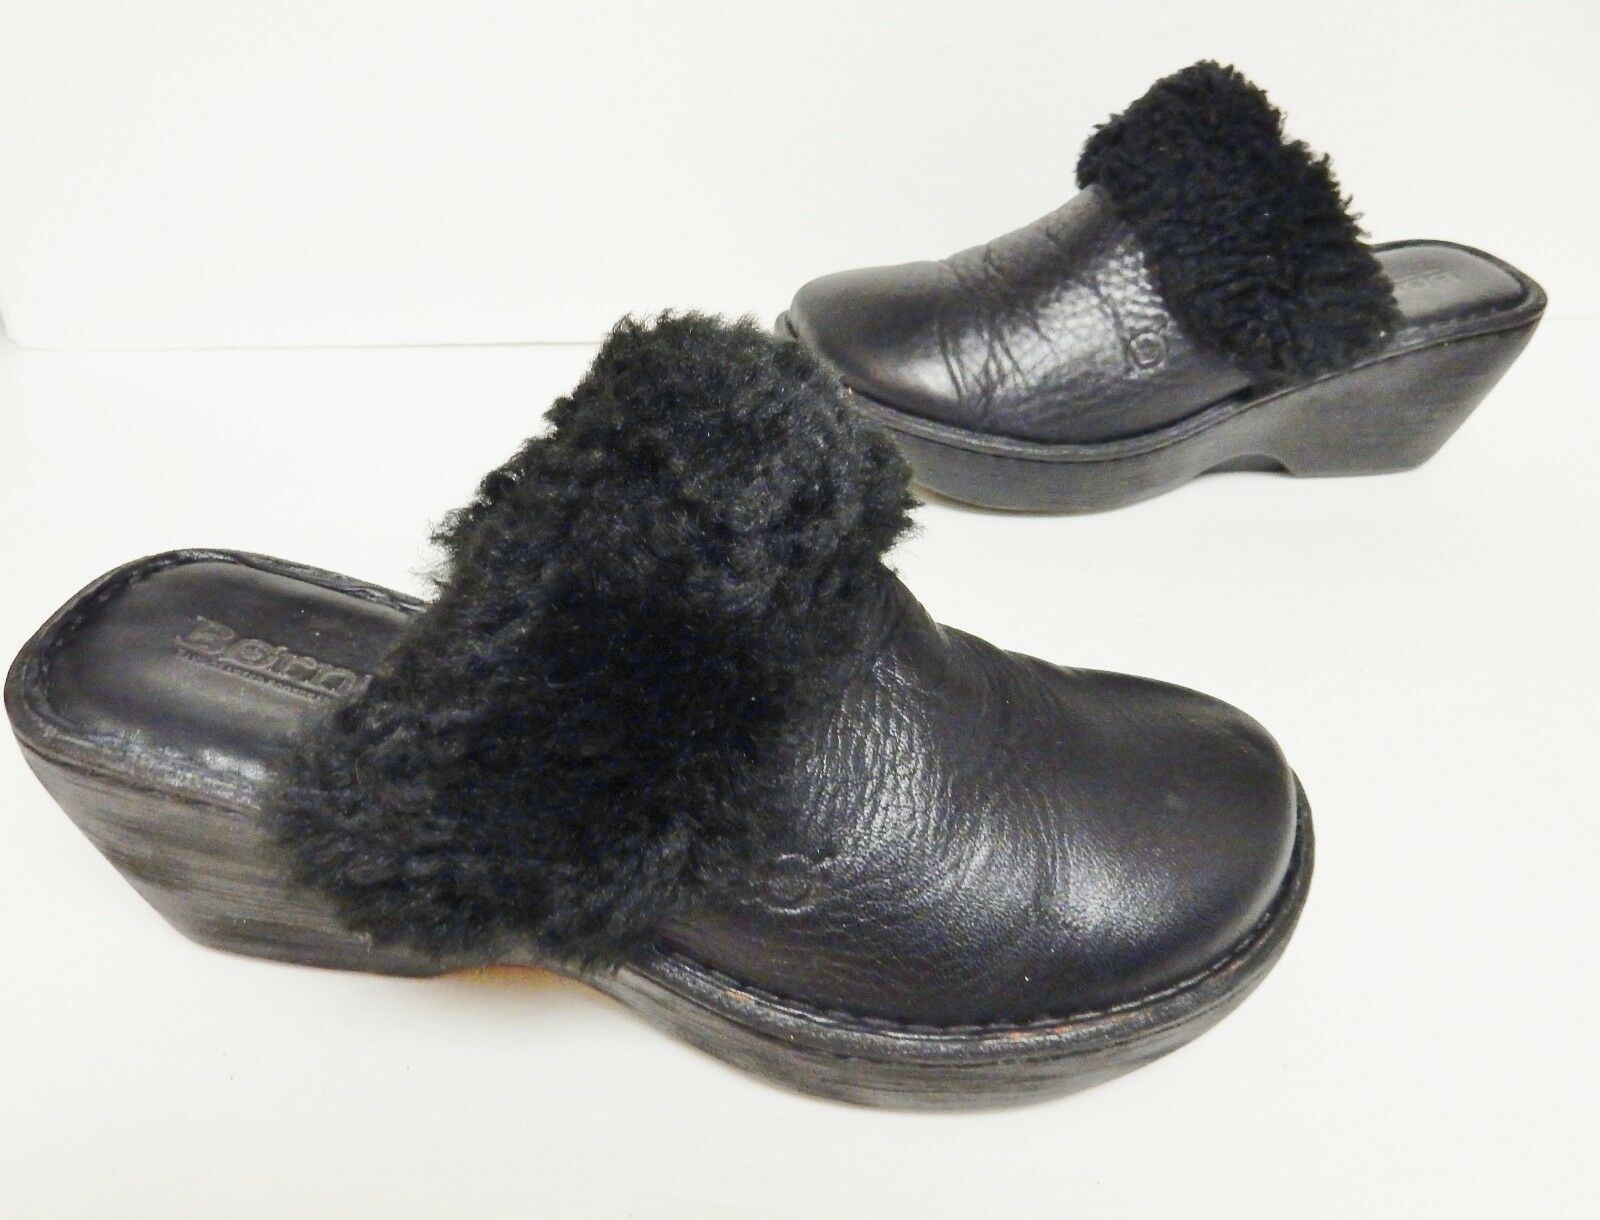 wedge mules and clogs